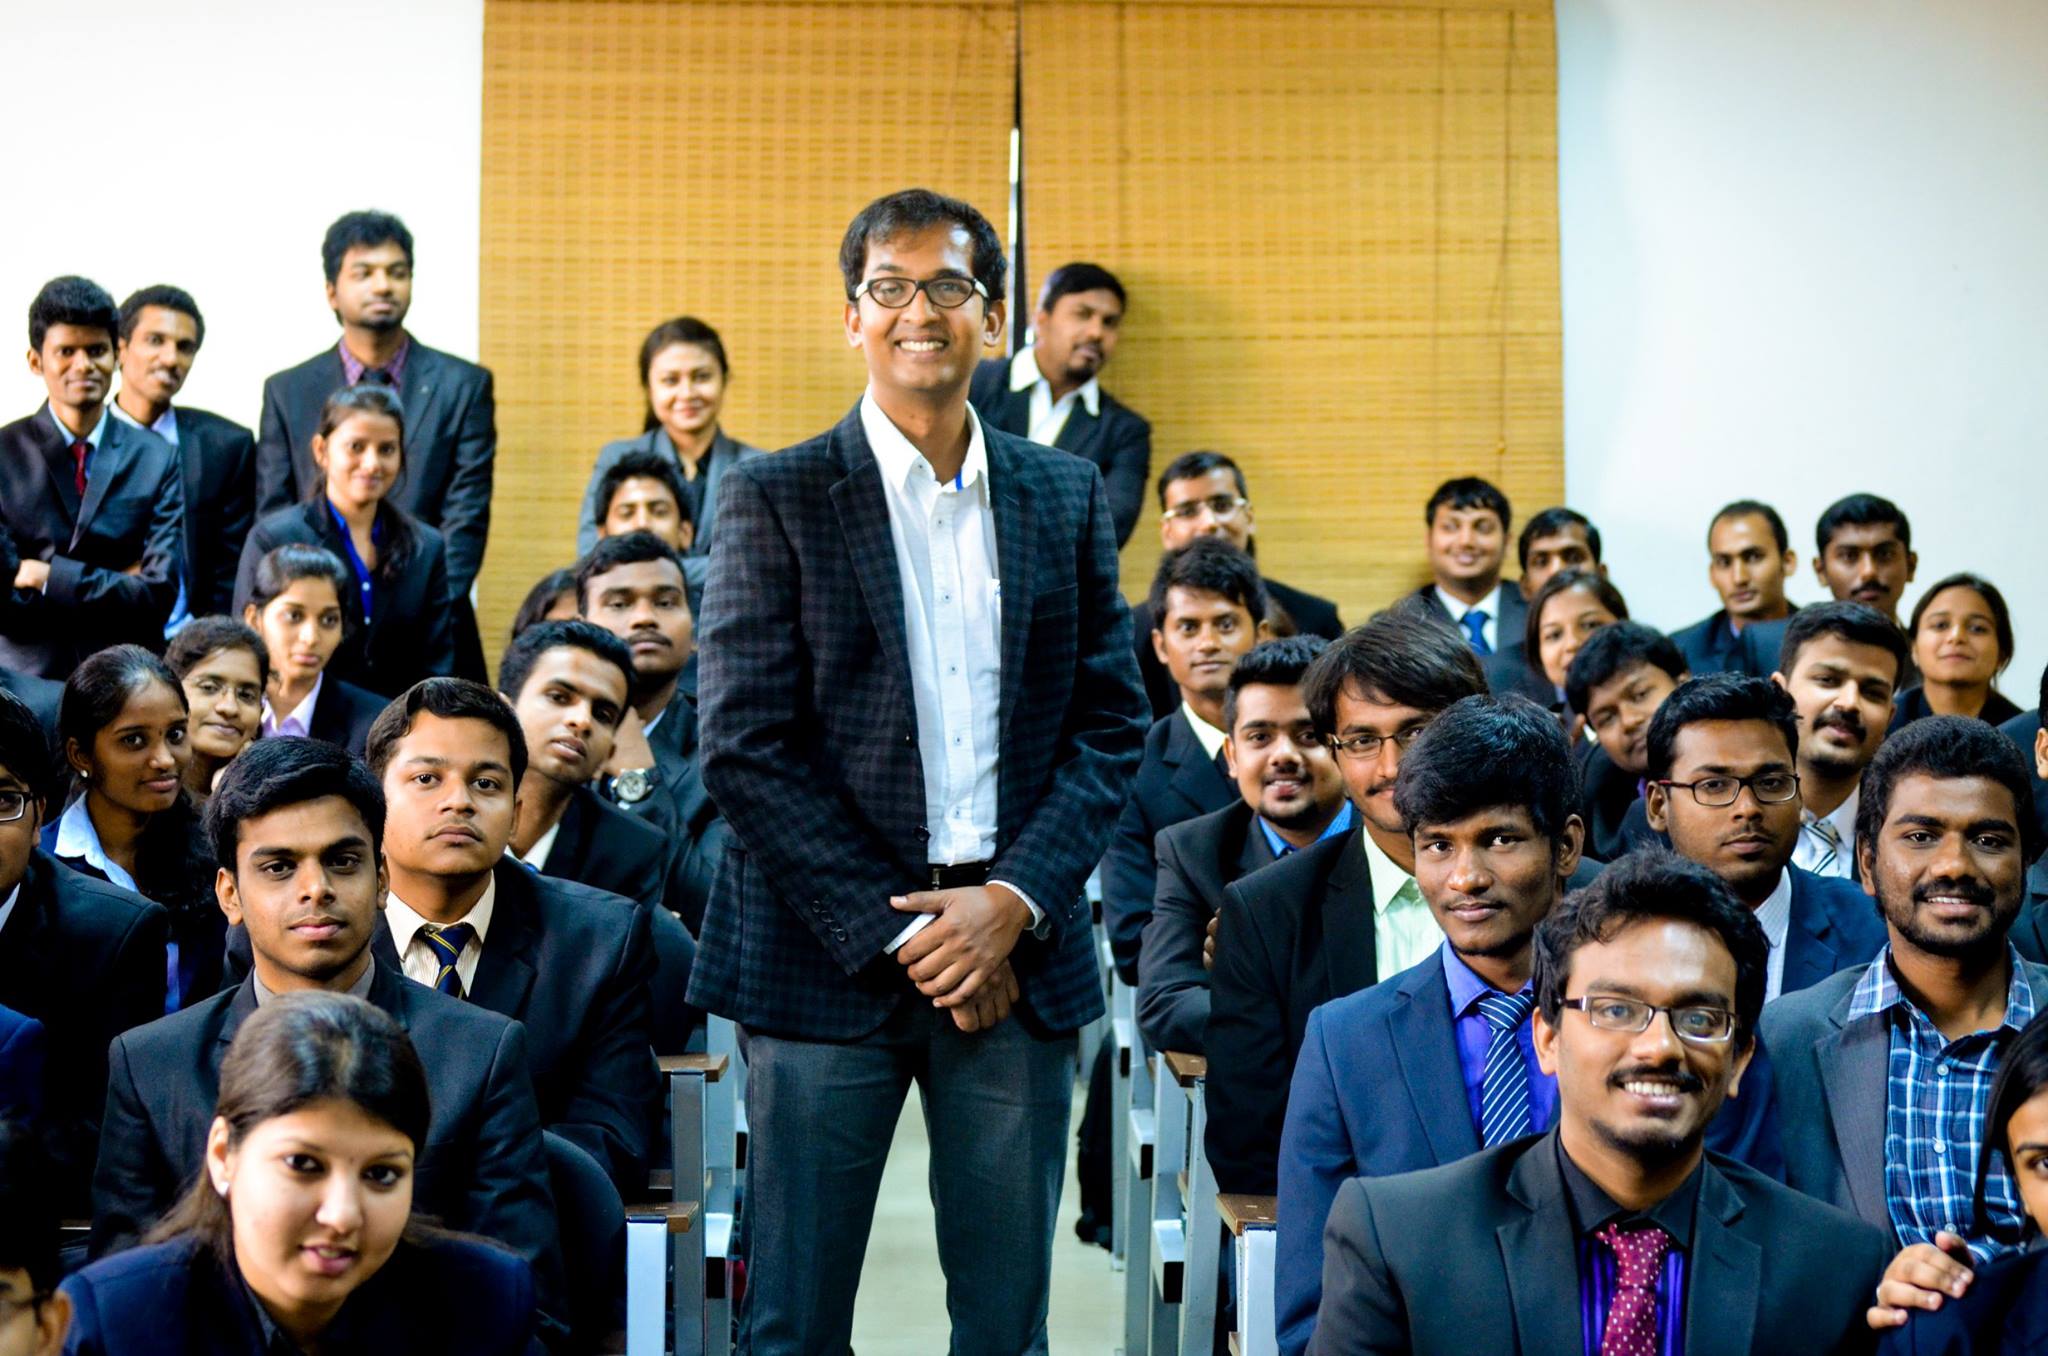 Guest Lecture at Vanguard Business School